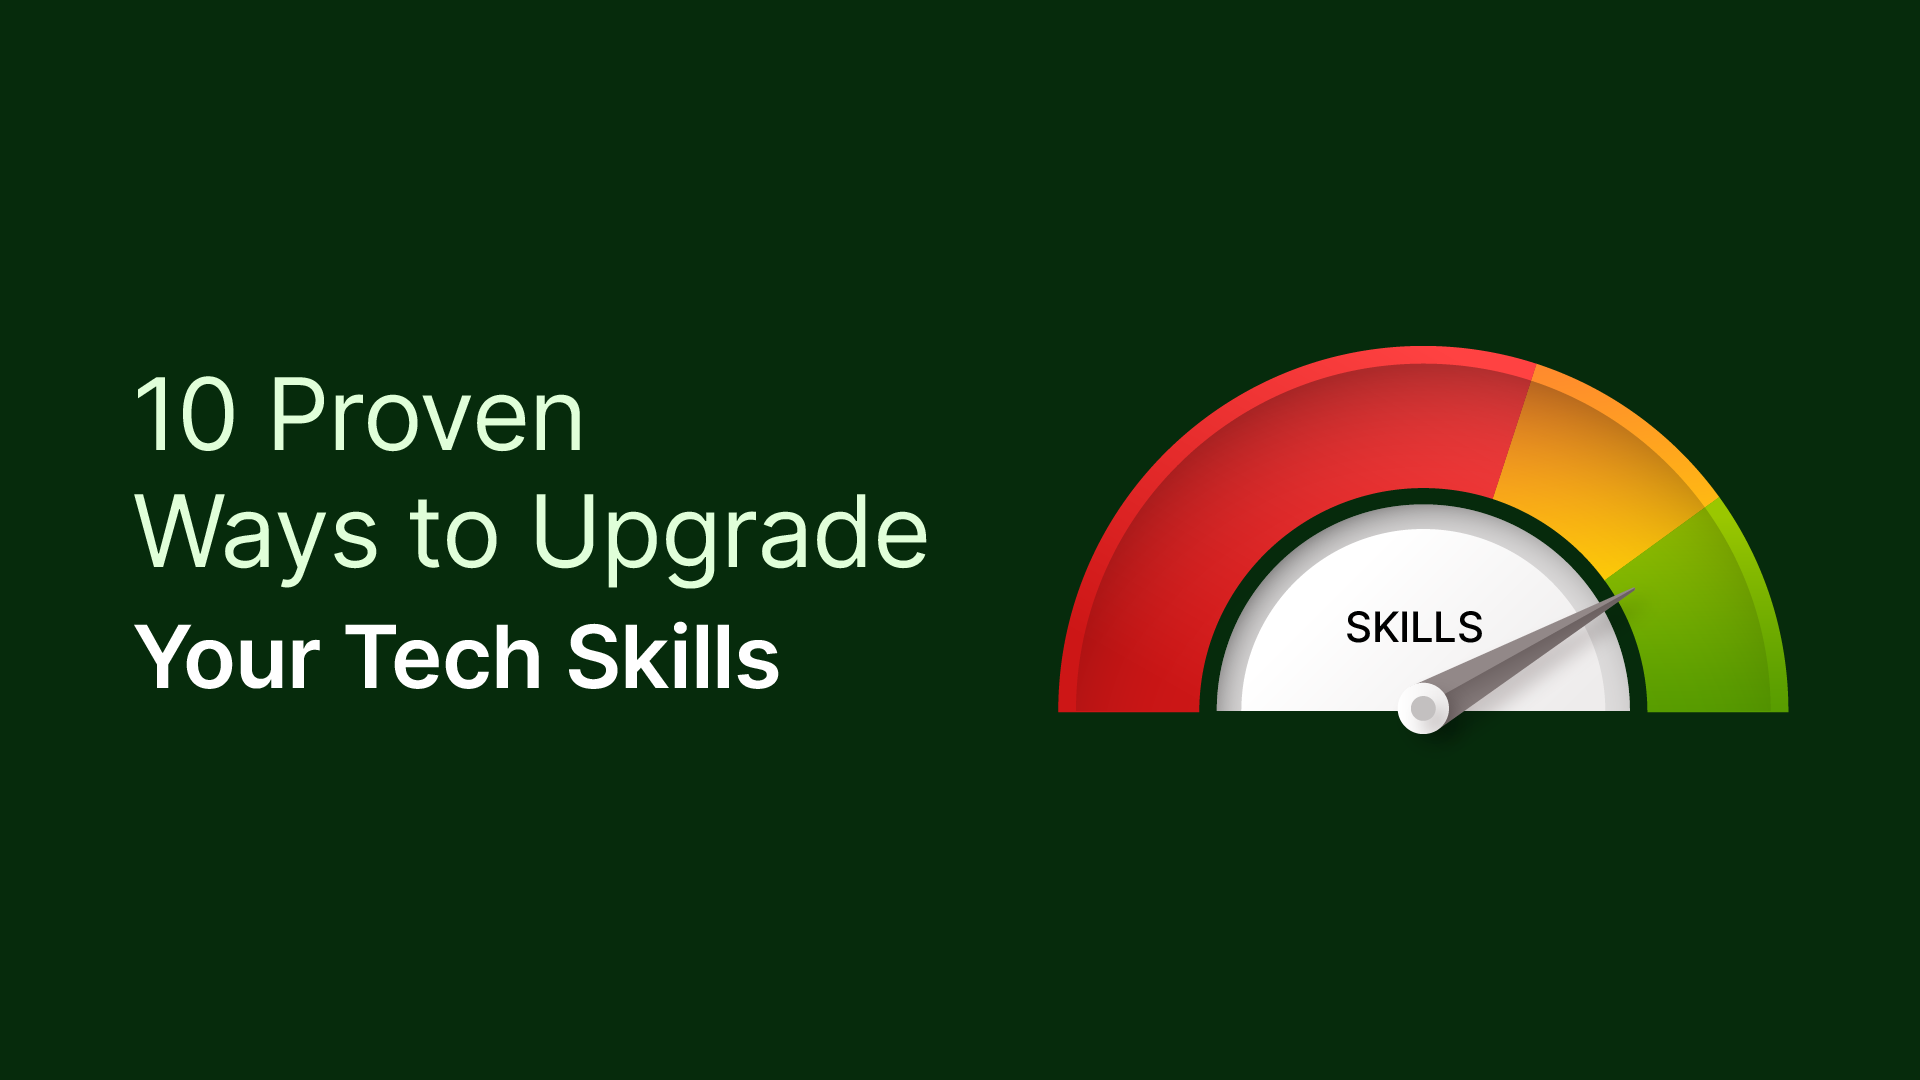 10 Proven Ways to Upgrade Your Tech Skills